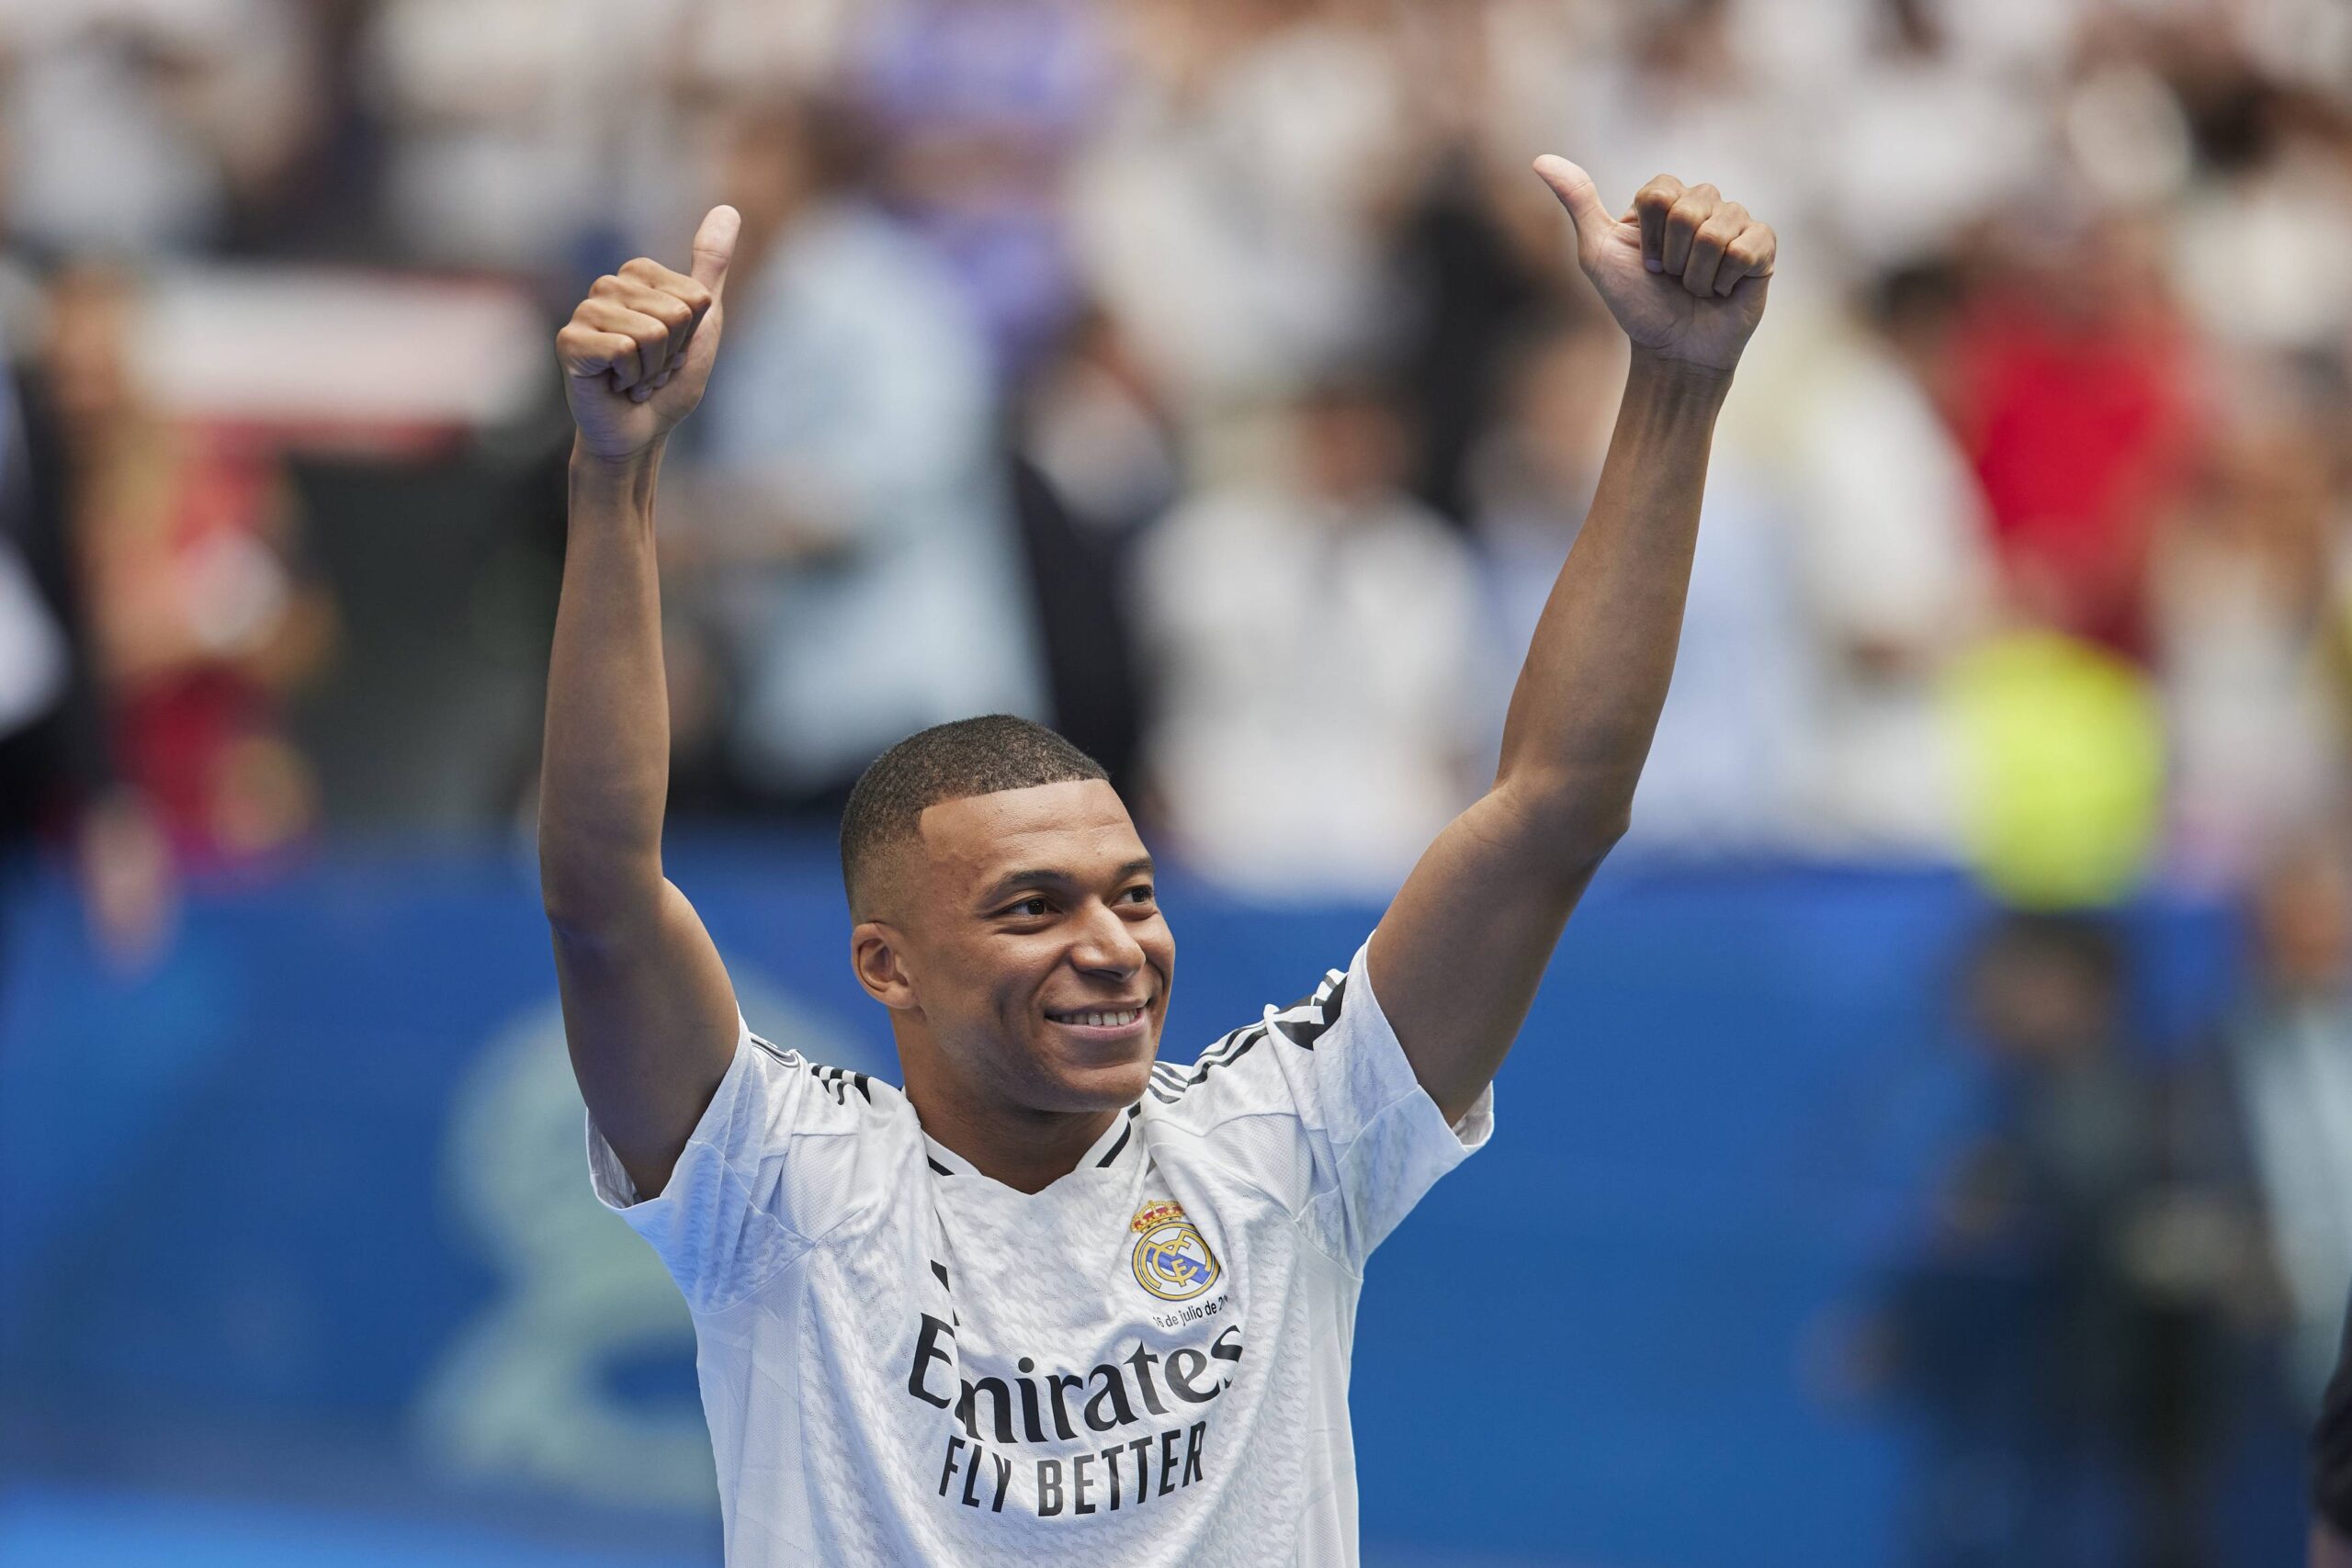 French sensation Mbappe basks in glory as 80,000 excited Real Madrid fans give him raucous Bernabeu Stadium welcome